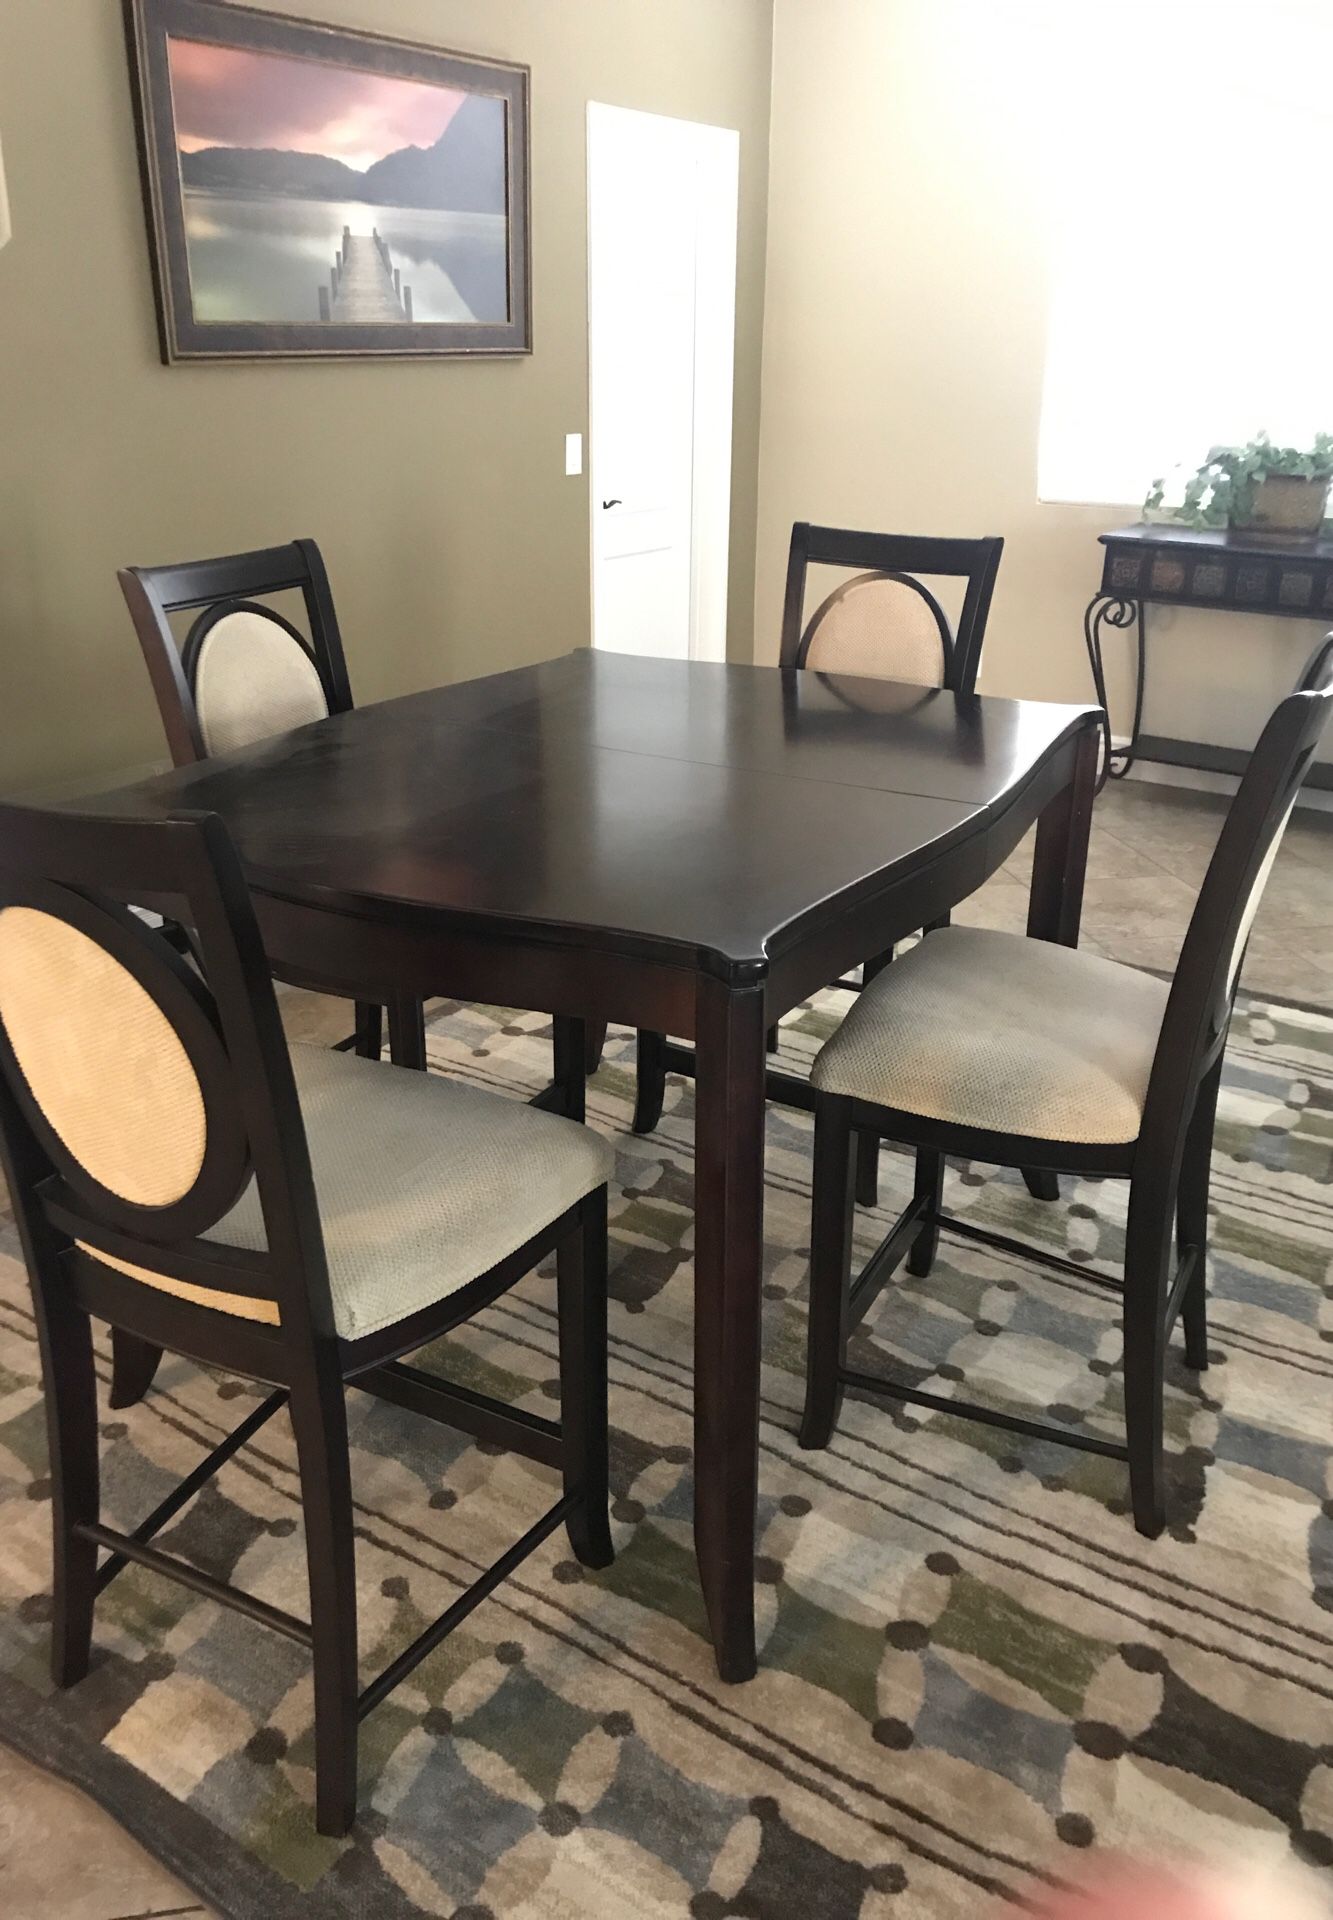 Table with 4 chairs- expanded leaf seat for 6